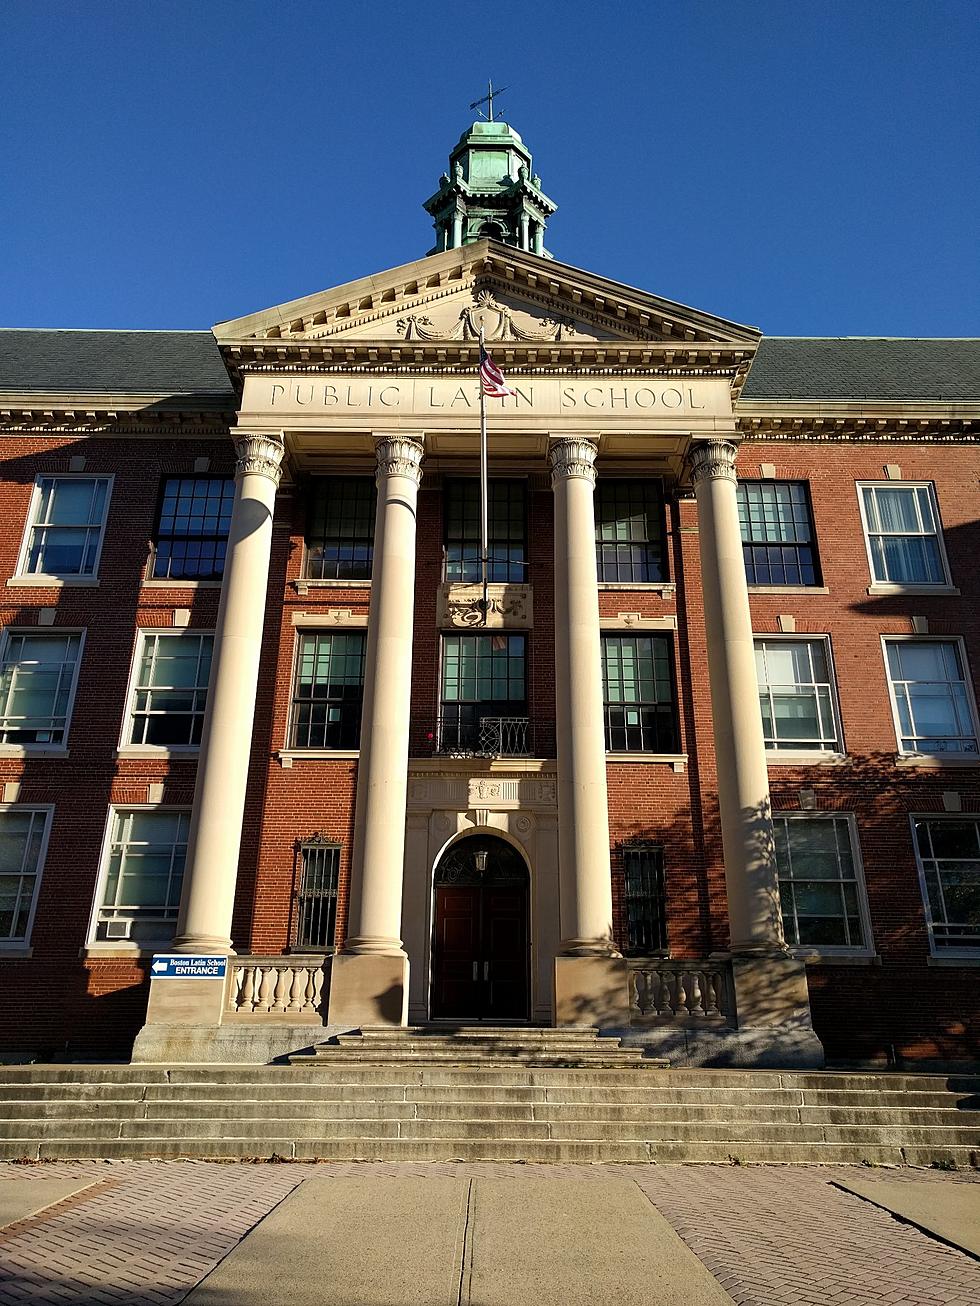 These Three Massachusetts High Schools Are the Oldest in the U.S.